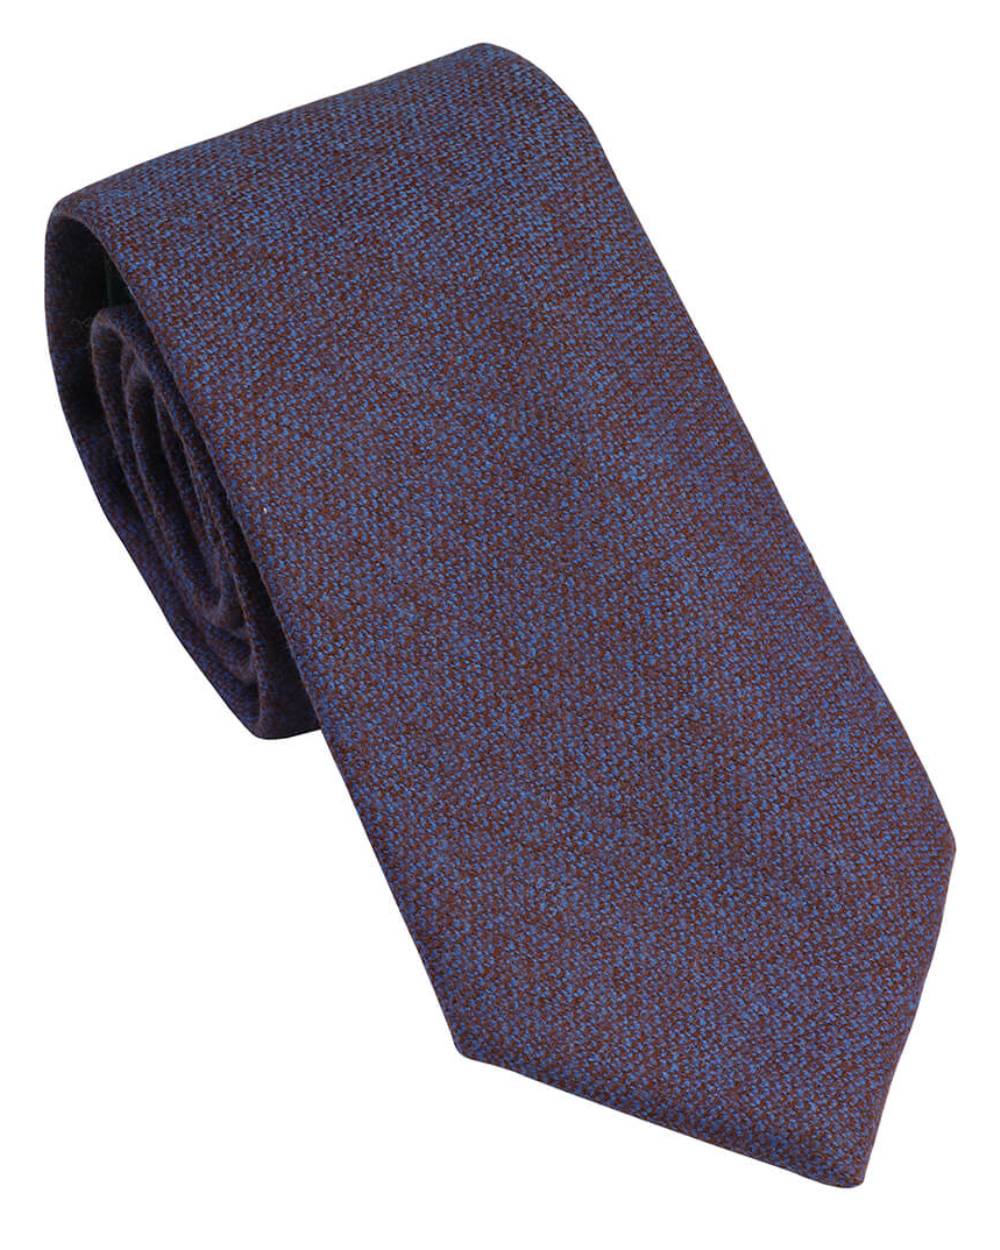 Brownie/Blue Coloured Laksen Celtic Tweed Tie On A White Background 